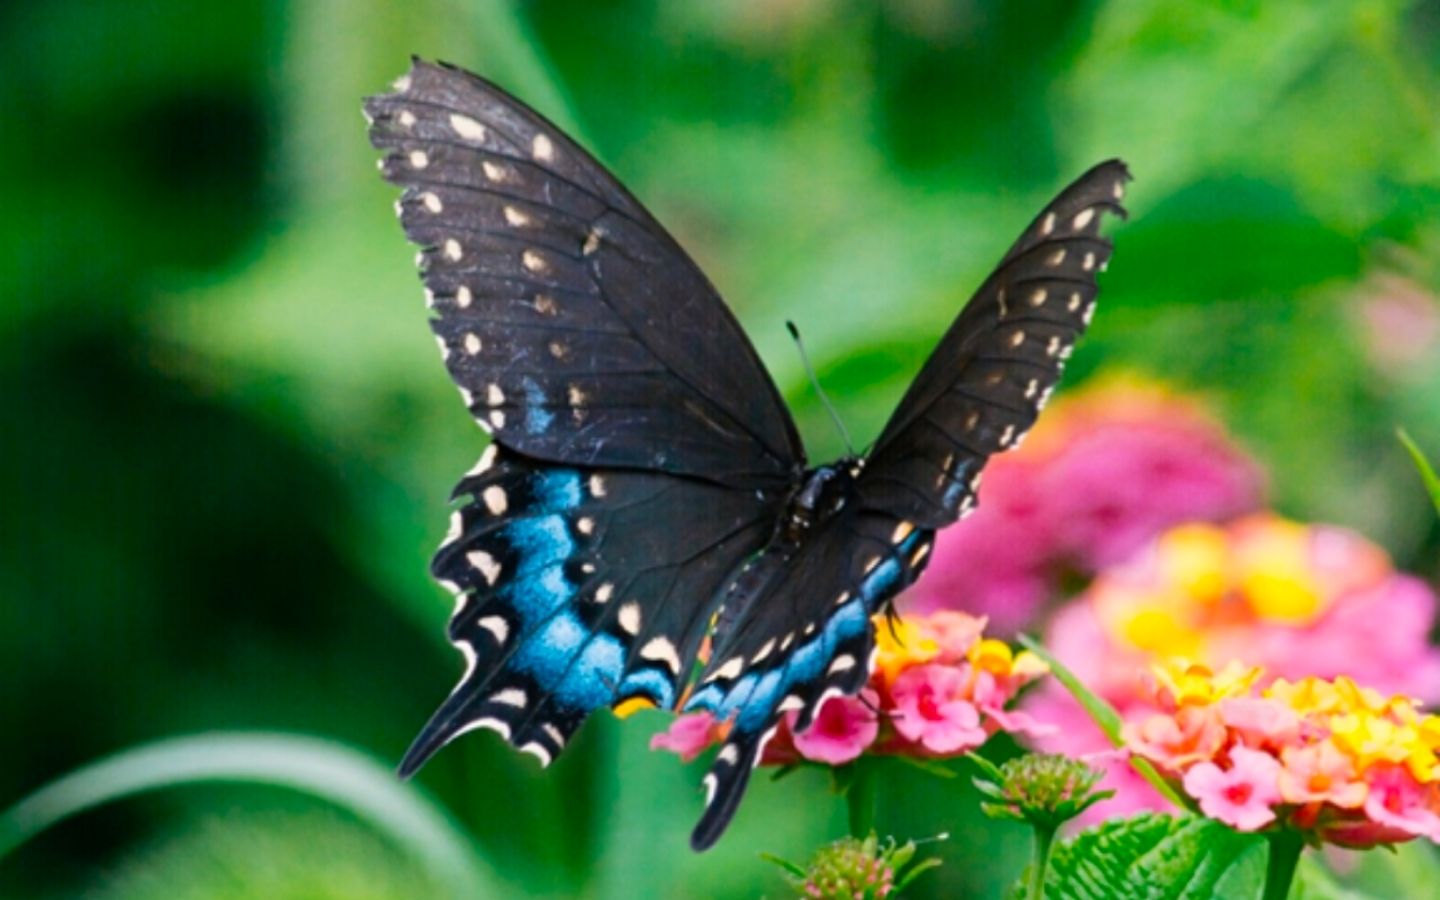 Blue and black butterfly feeding on yellow and pink flowers